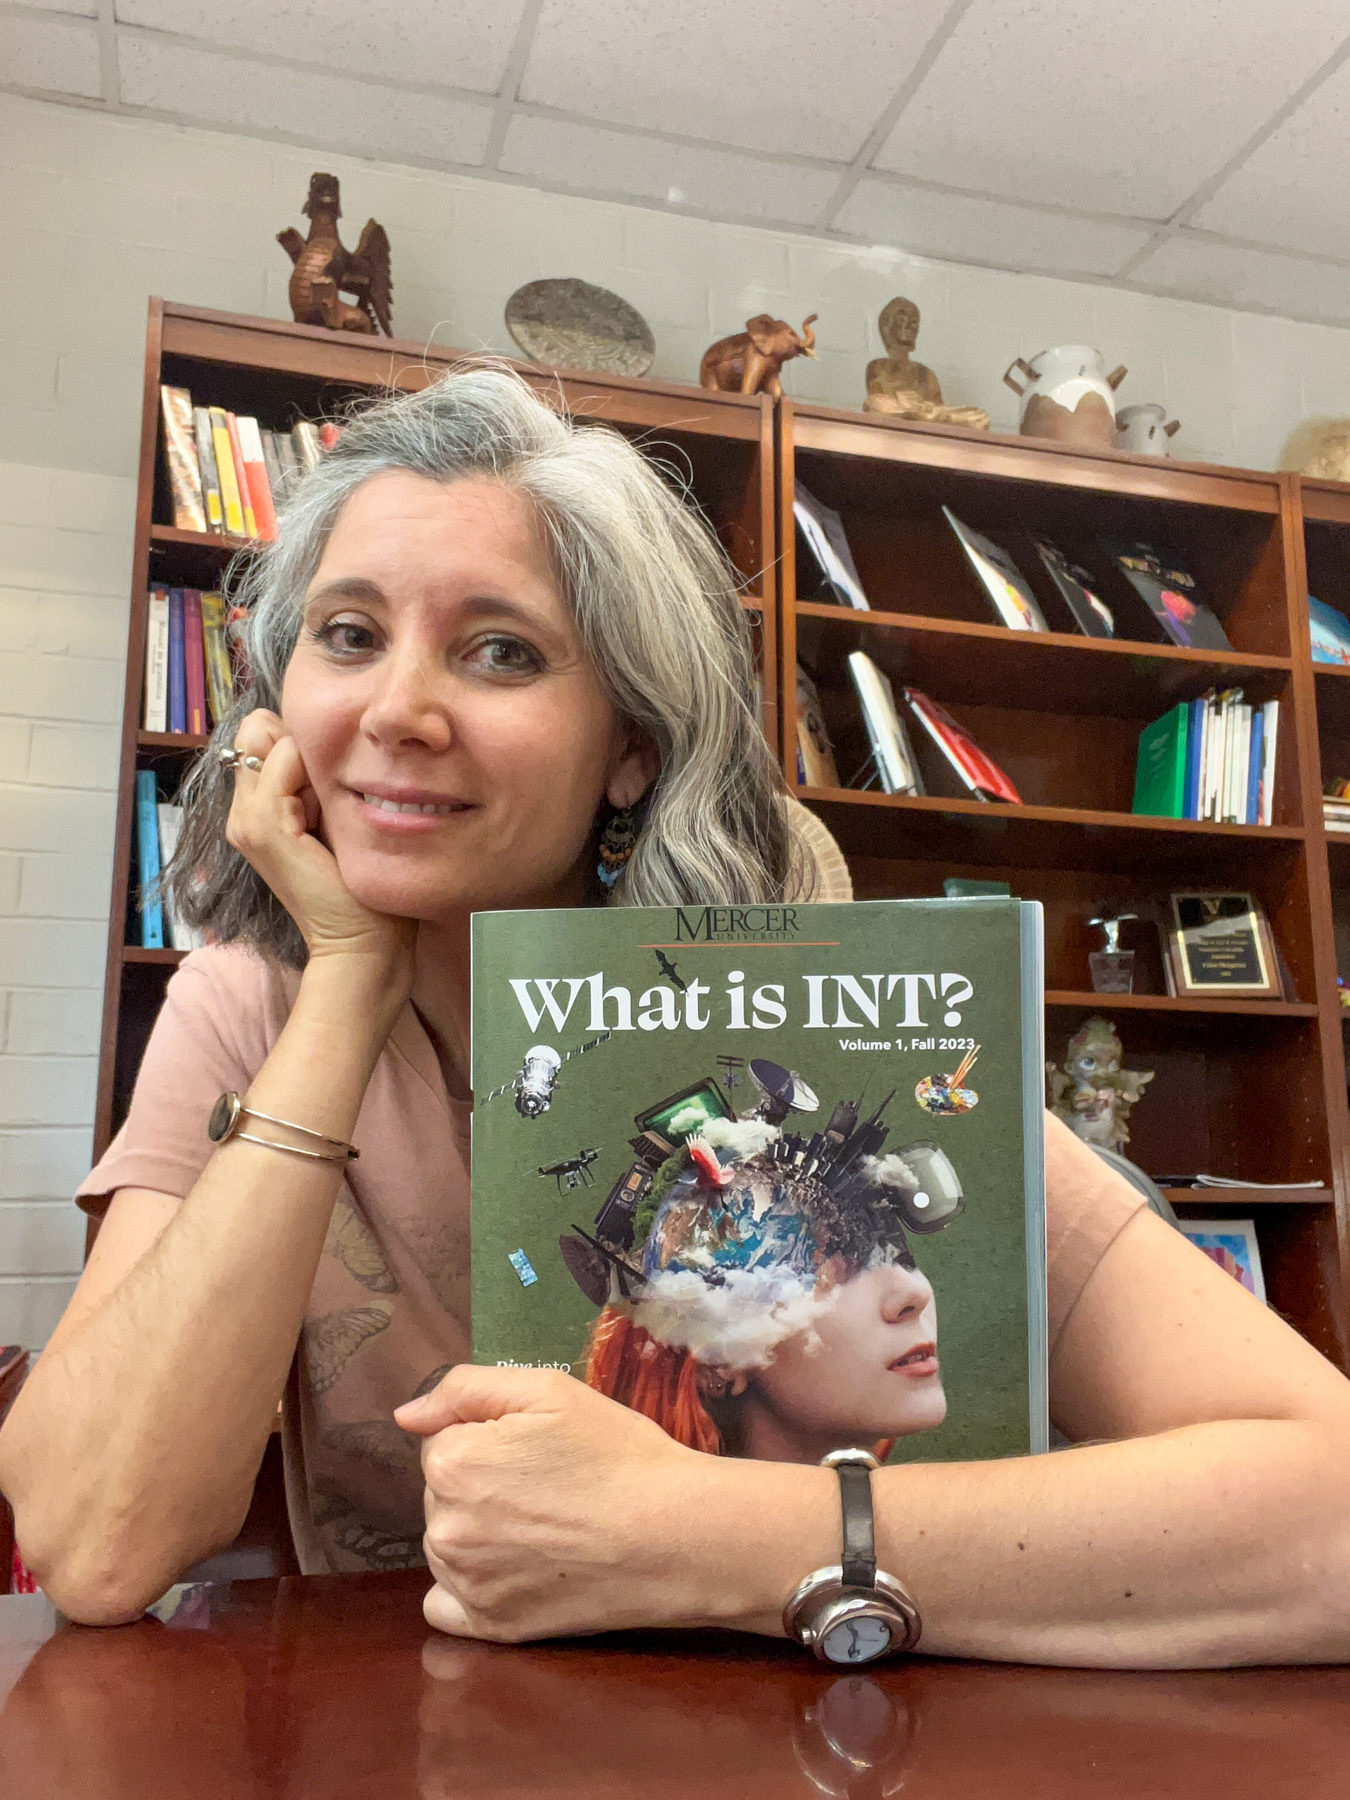 dr clara mengolini shows off the cover of the what is int? magazine